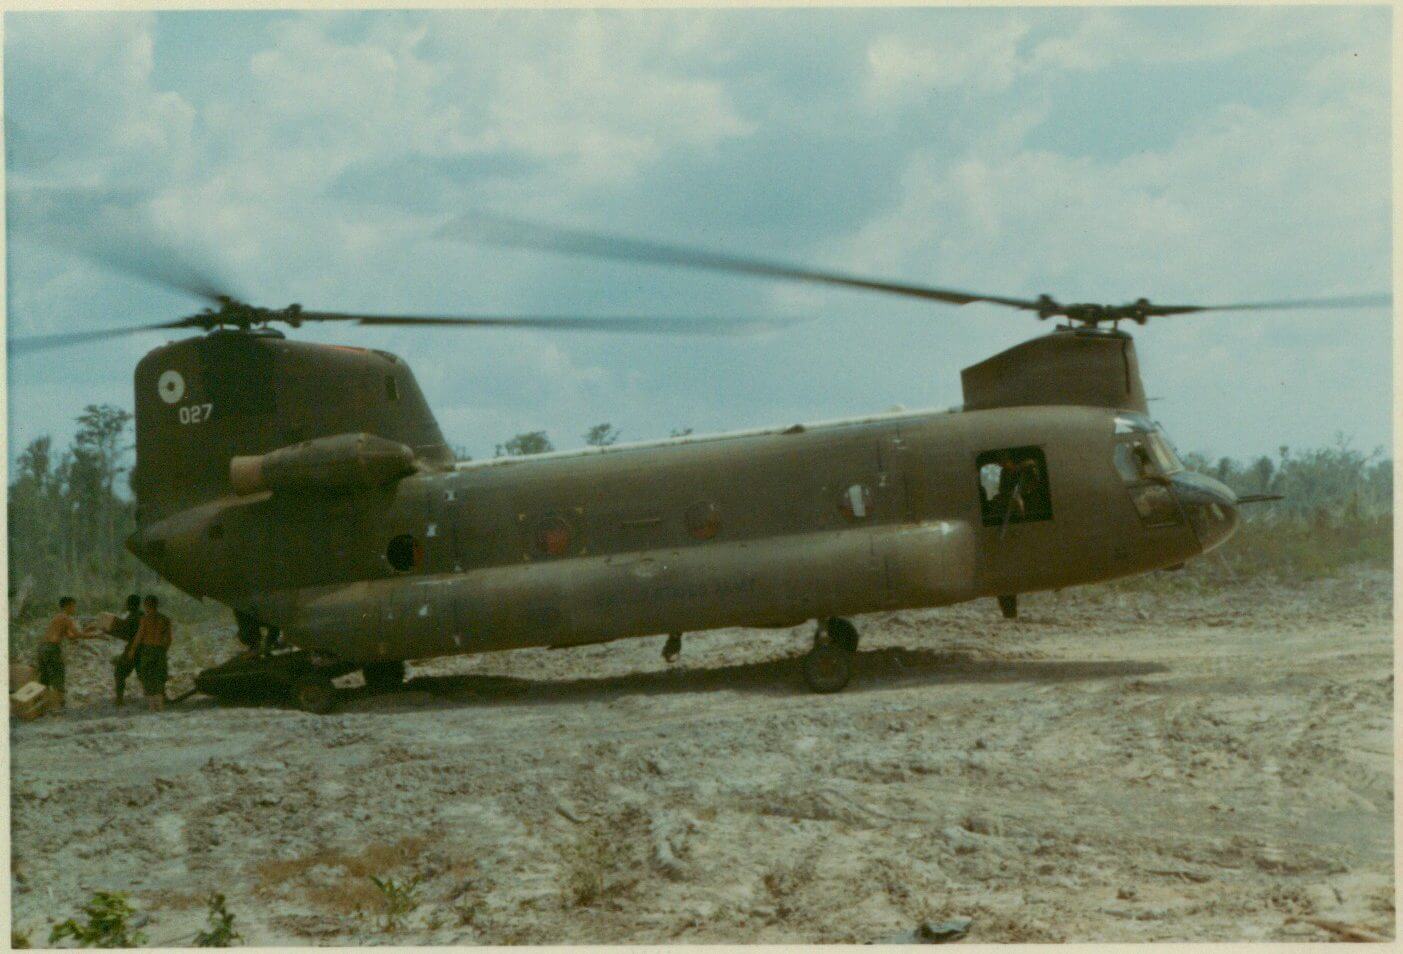 A Chinook helicopter on the ground.